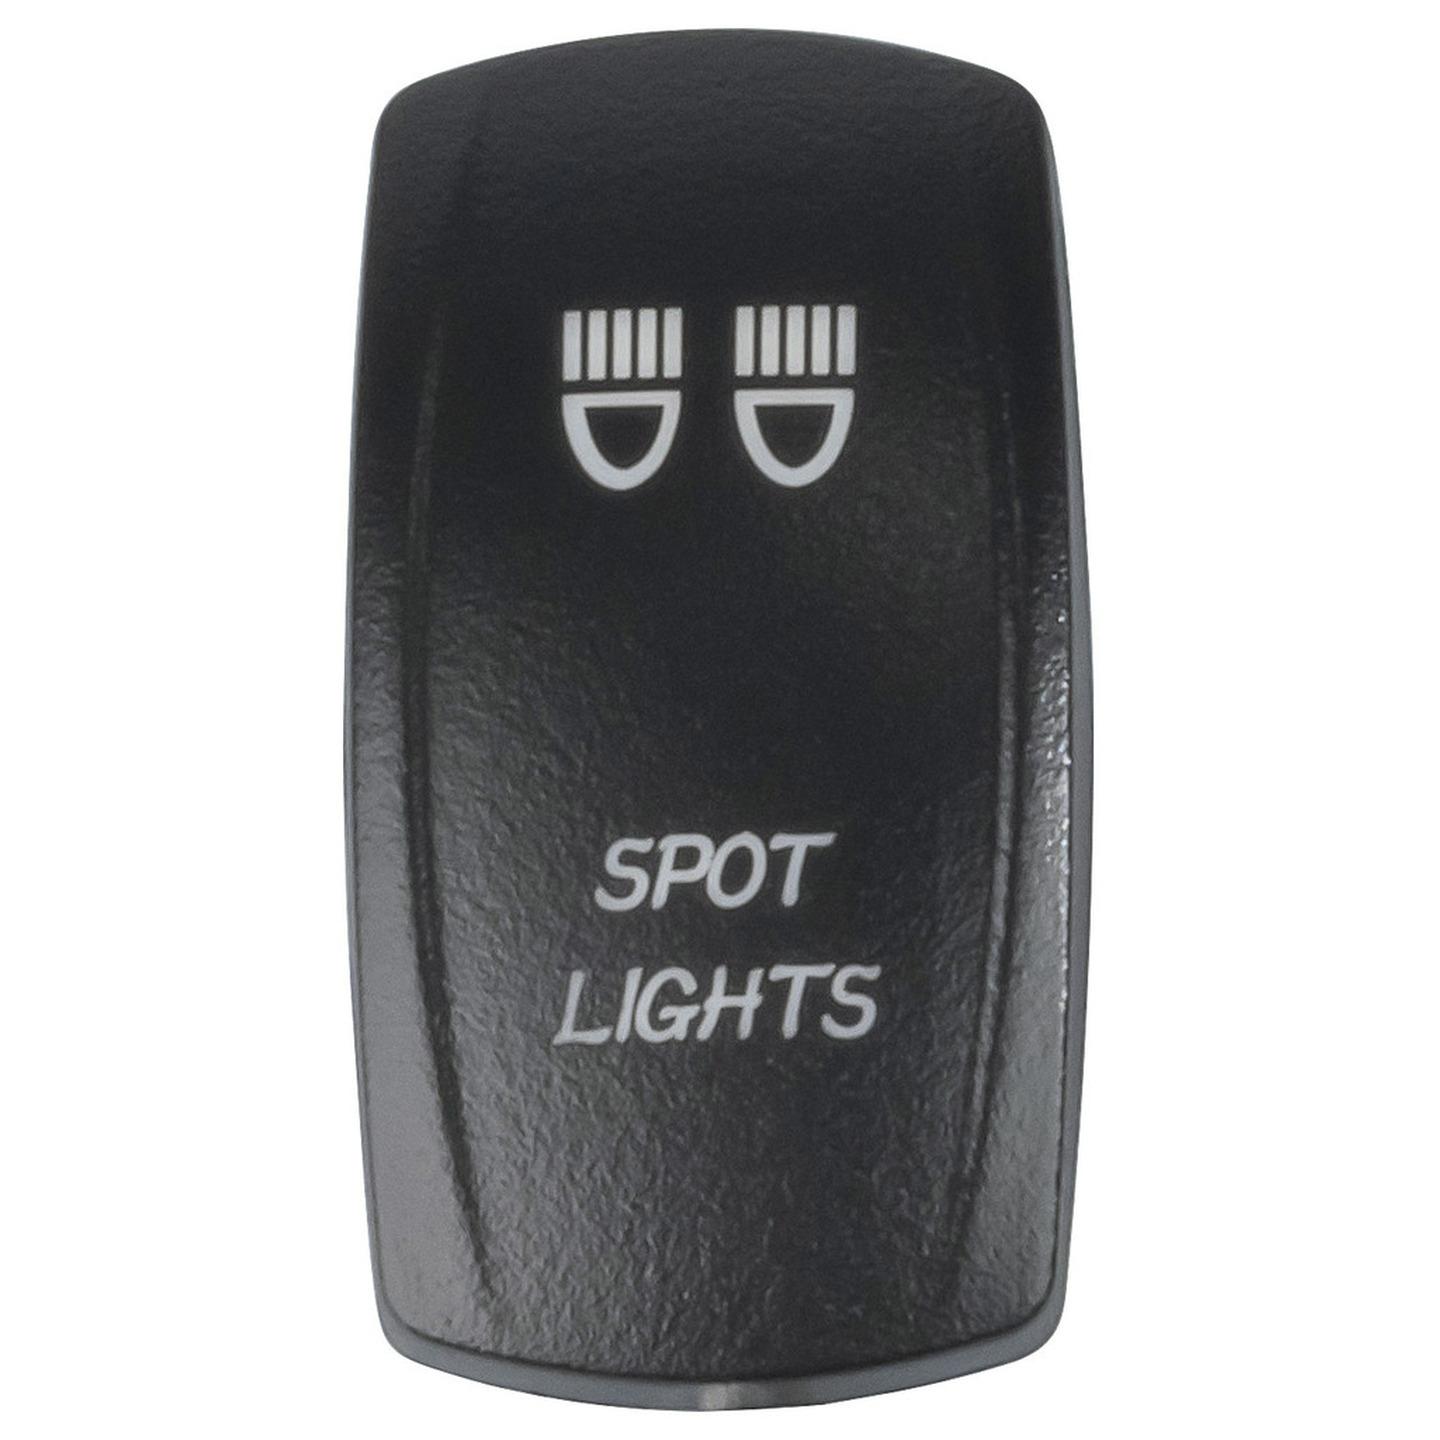 Laser Etched Spot Lights Cover for Illuminated Rocker Switch